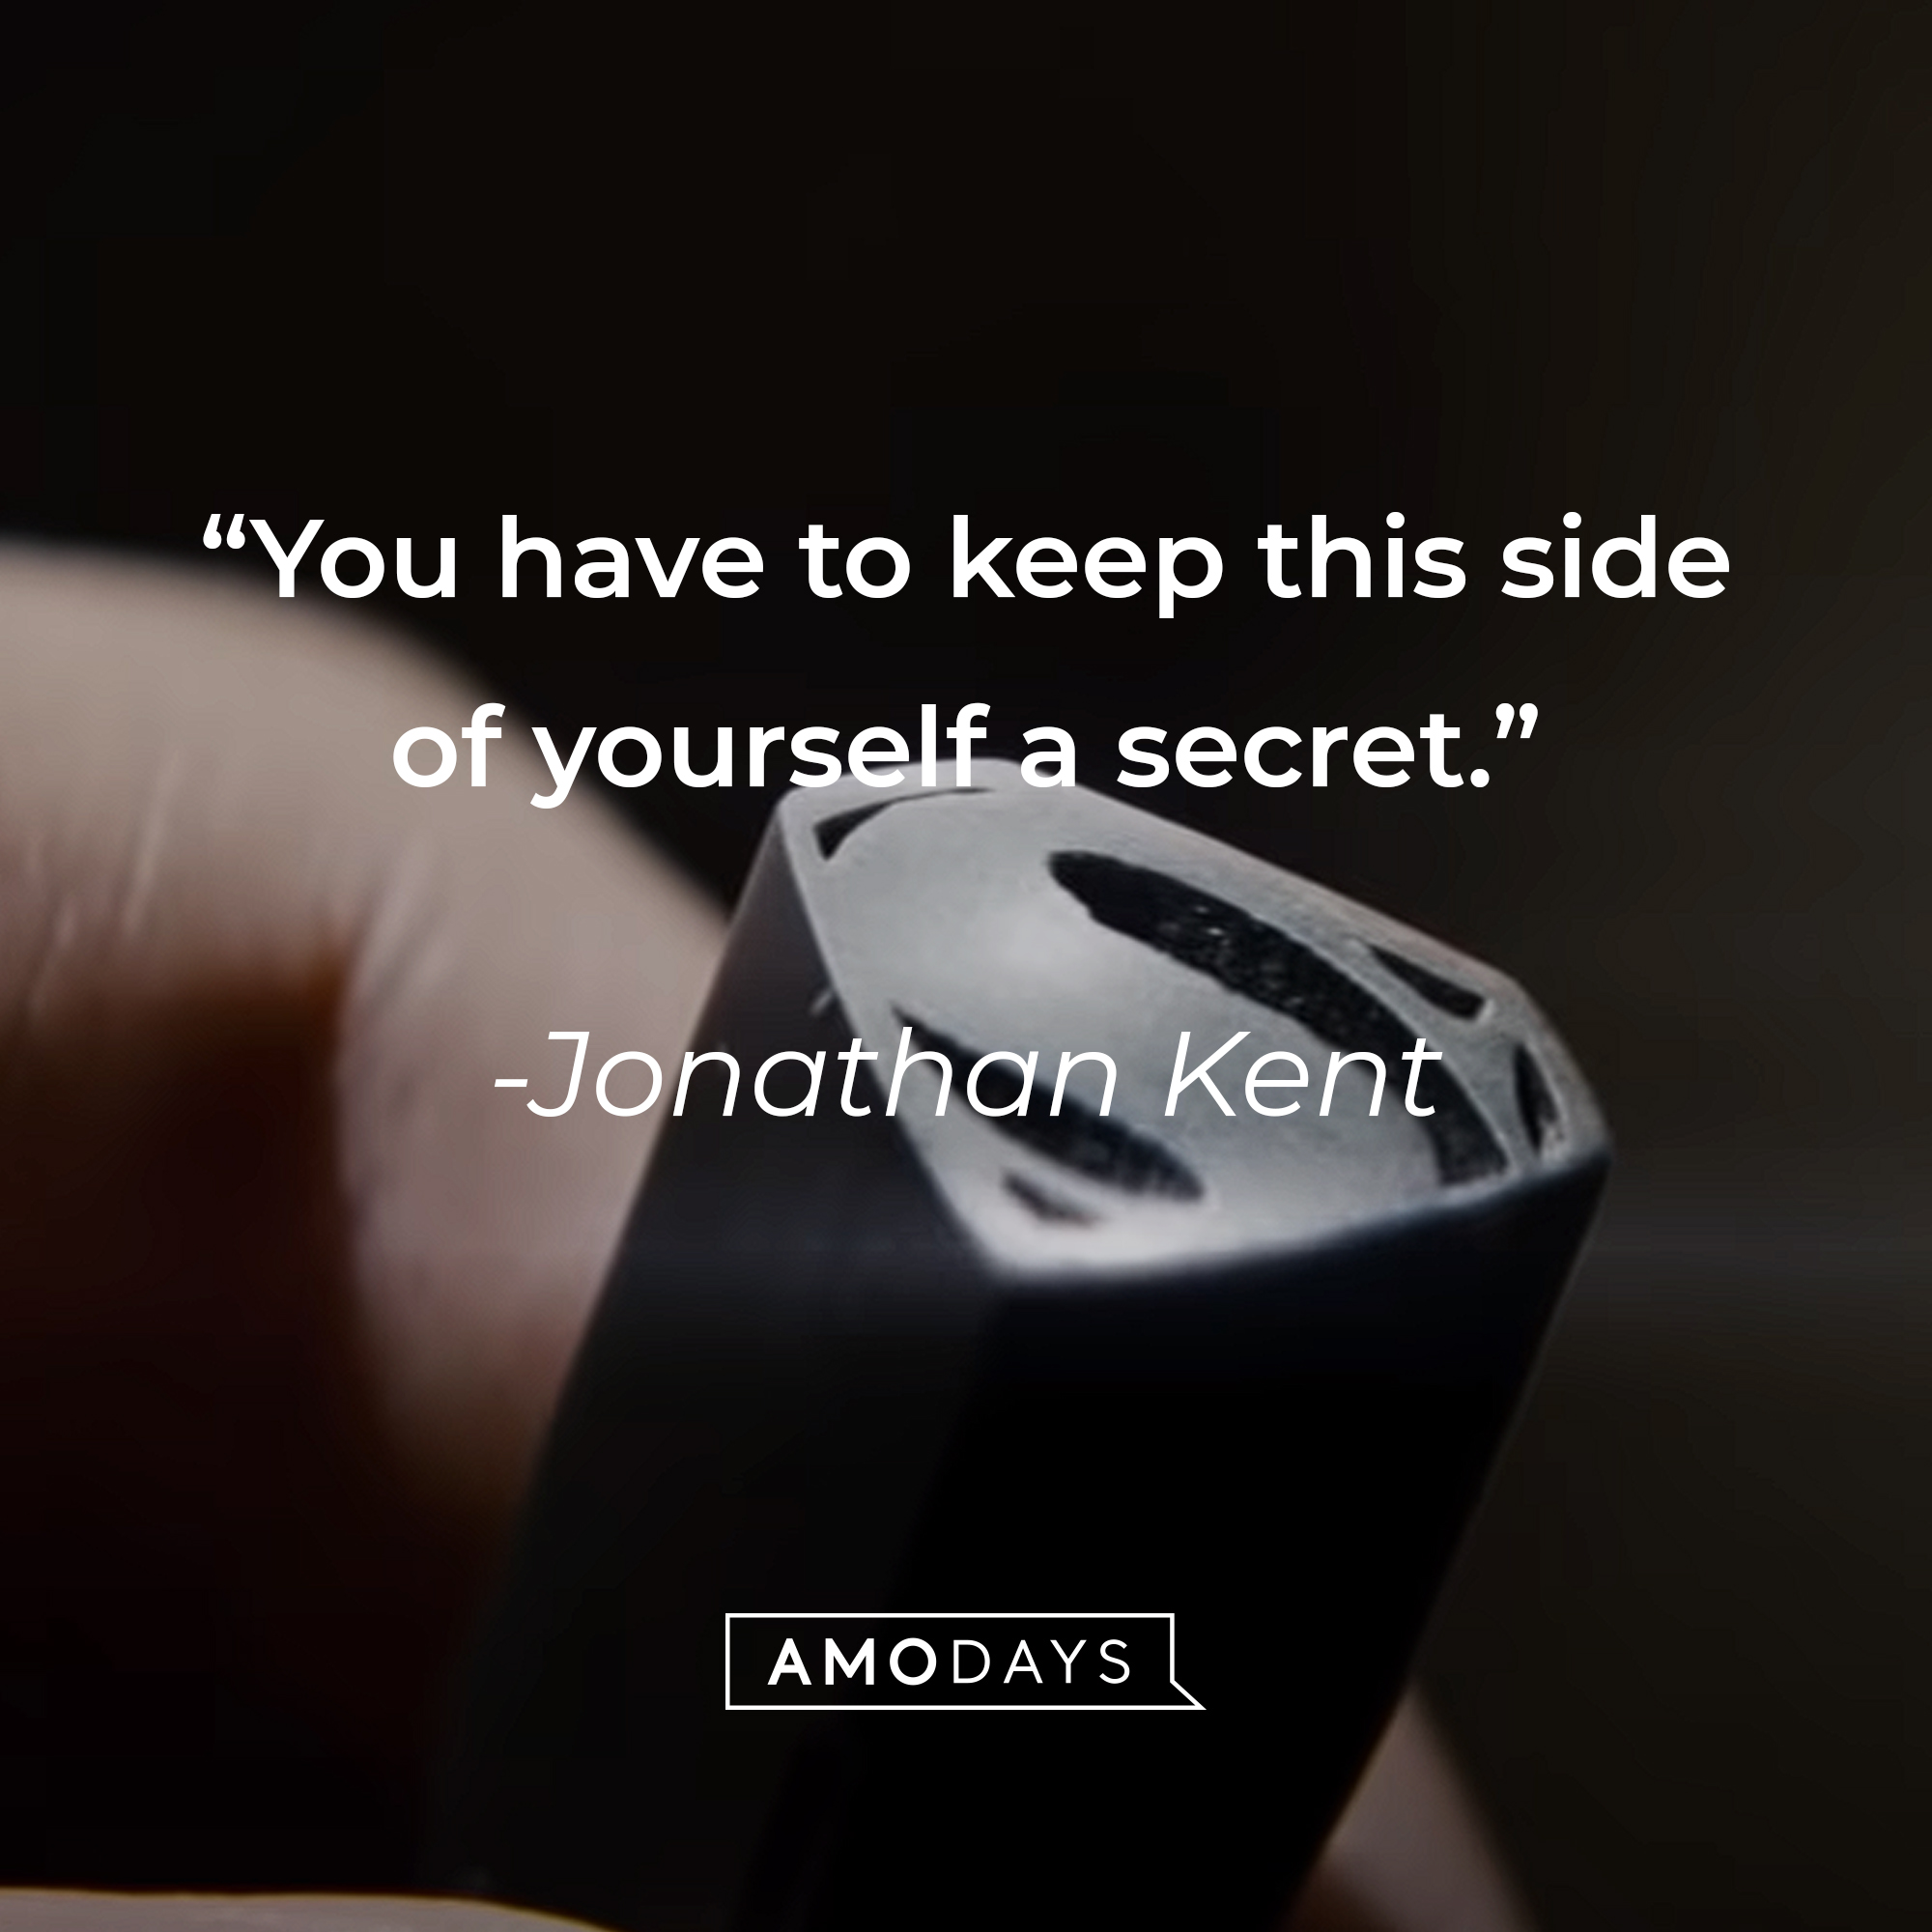 Jonathan Kent's quote: "You have to keep this side of yourself a secret." | Source: Youtube.com/WarnerBrosPictures